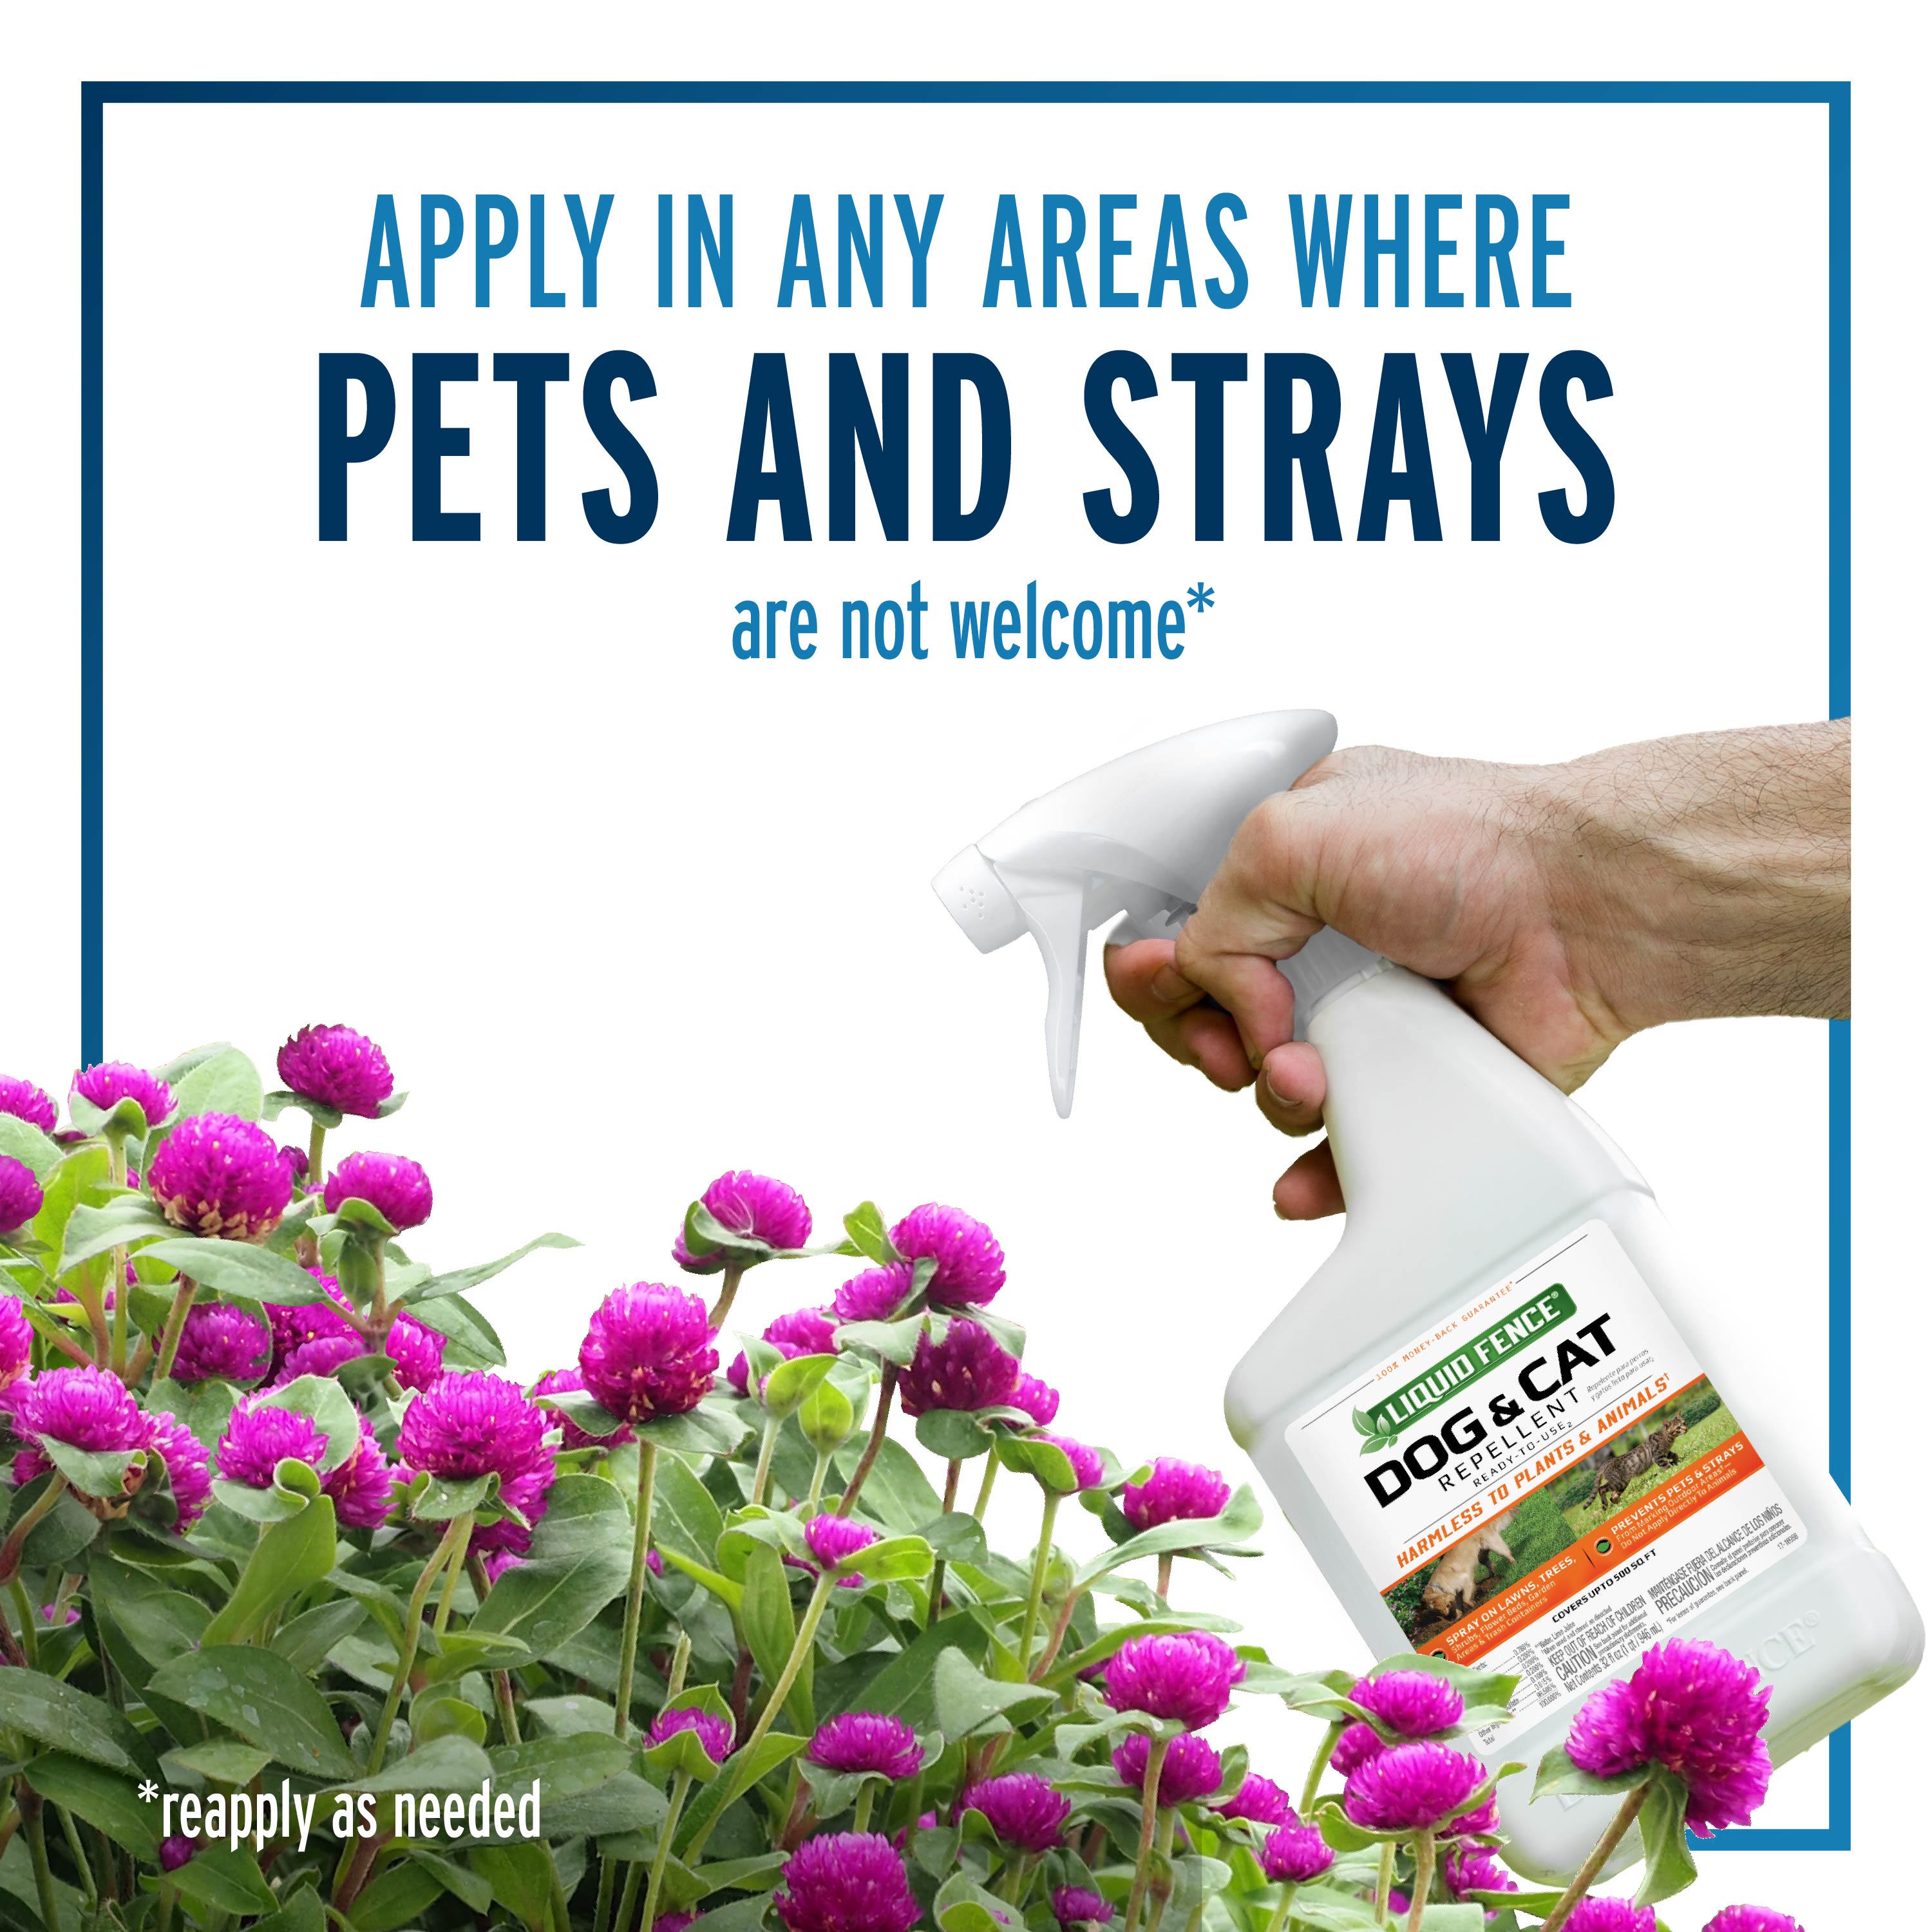 apply in areas where pets and strays are not welcome